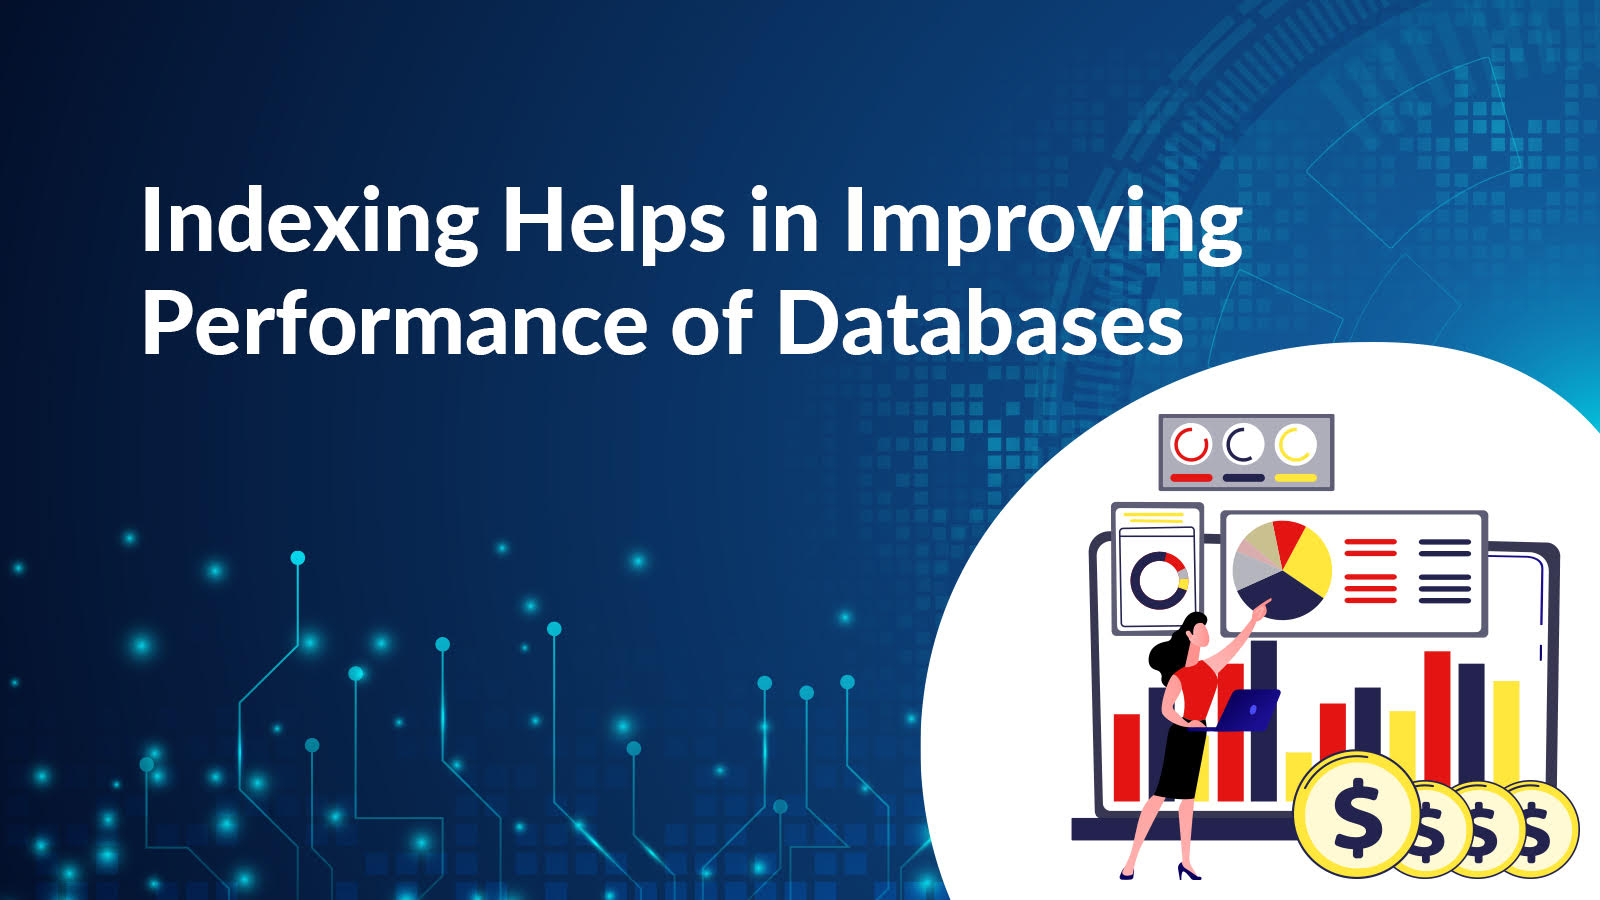 Performance of Databases